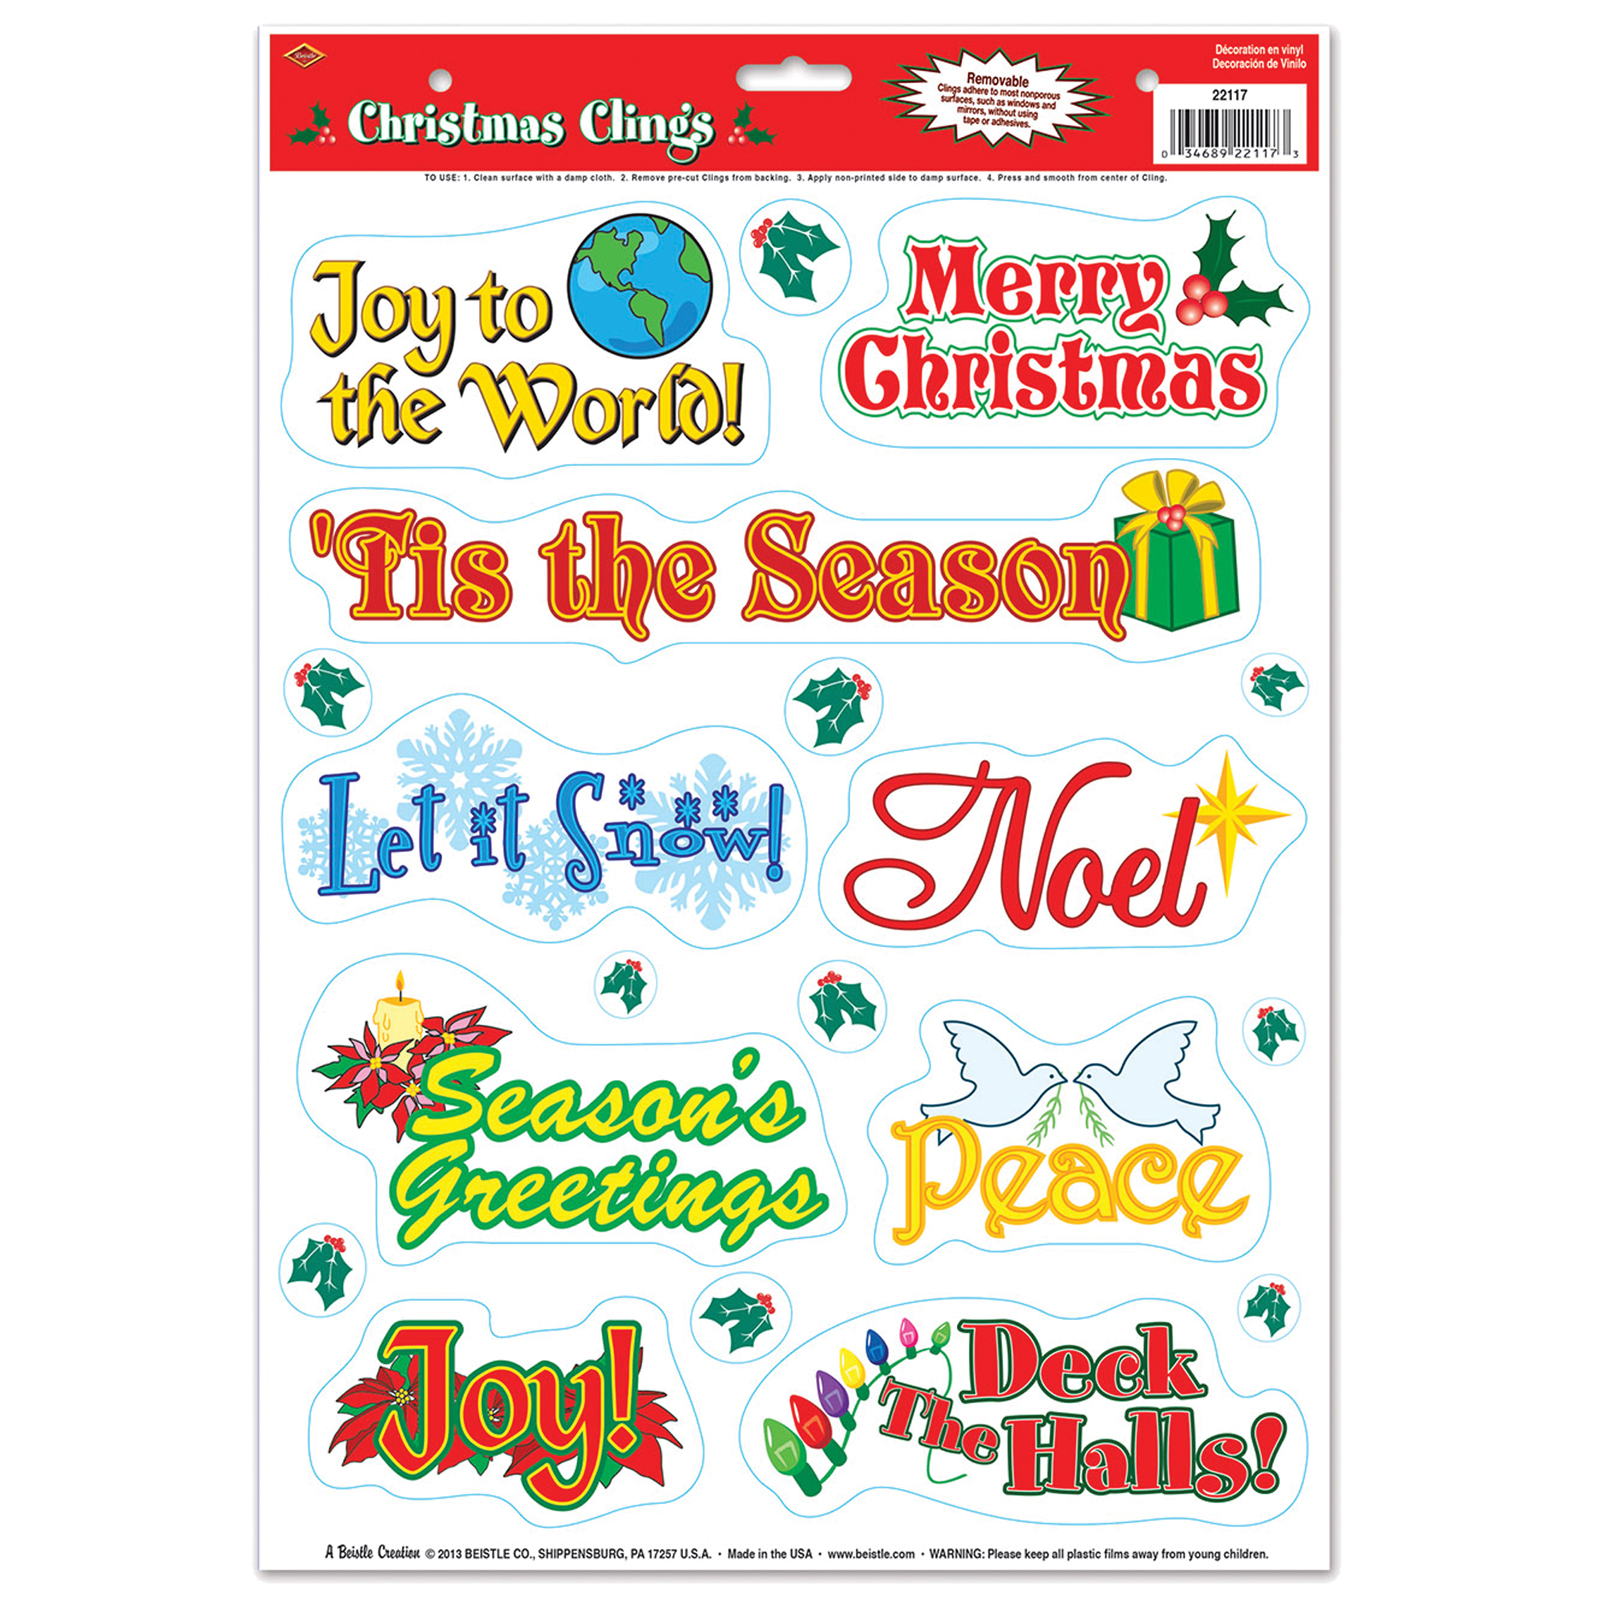 UPC 034689221173 product image for 19 ct. Christmas Static Cling Decals | upcitemdb.com